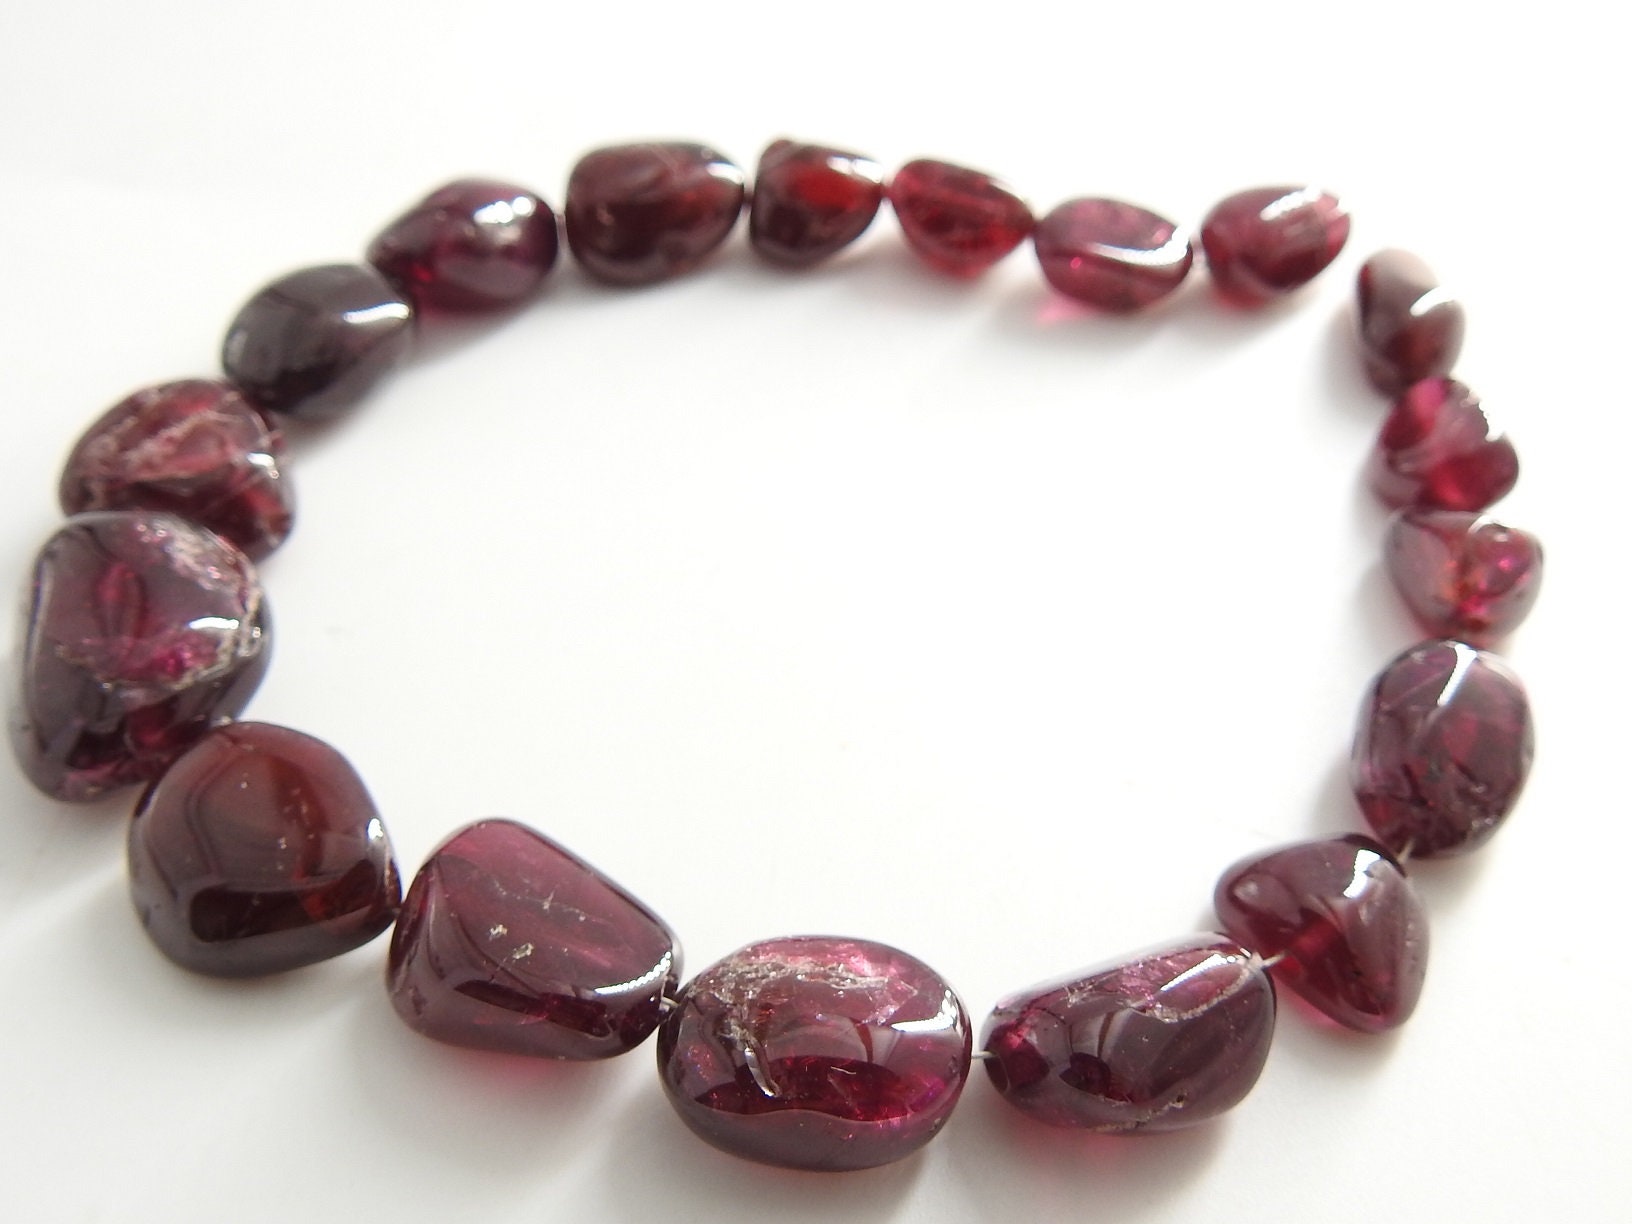 Natural Rhodolite Garnet Tumble,Smooth,Nuggets,Loose Bead,Handmade,For Making Jewelry,Wholesaler,12Inch 16X14To12X9MM Approx,PME-TU2 | Save 33% - Rajasthan Living 24